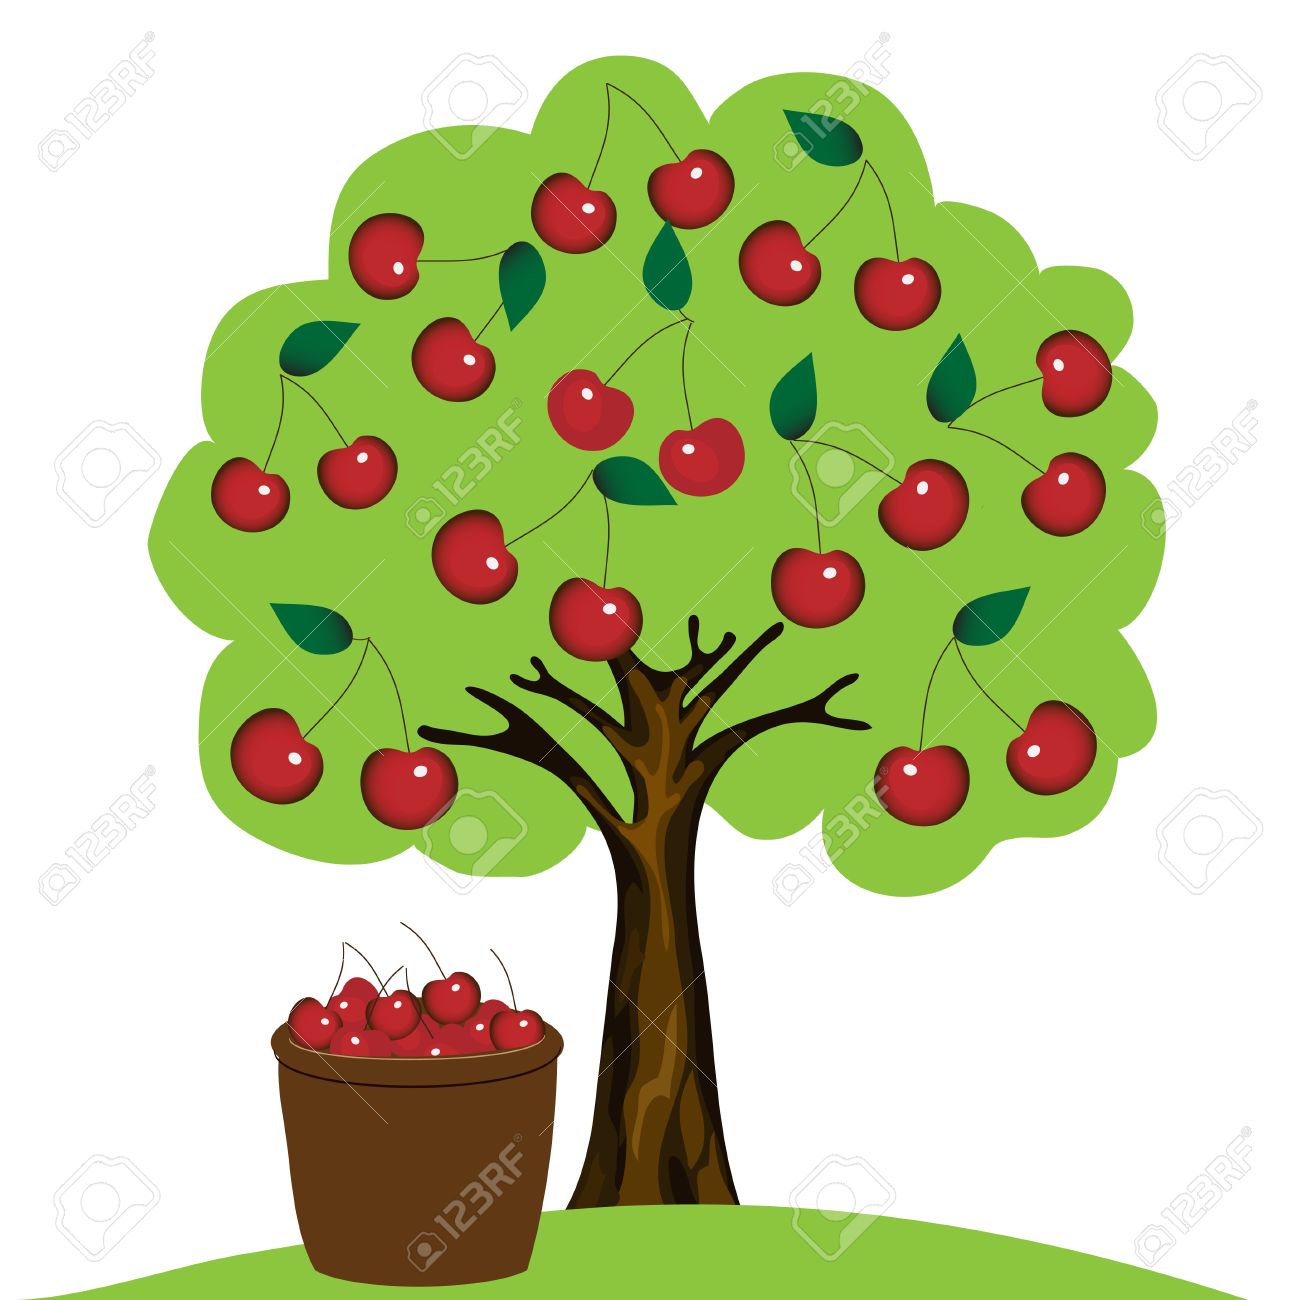 free clipart of fruit trees - photo #18